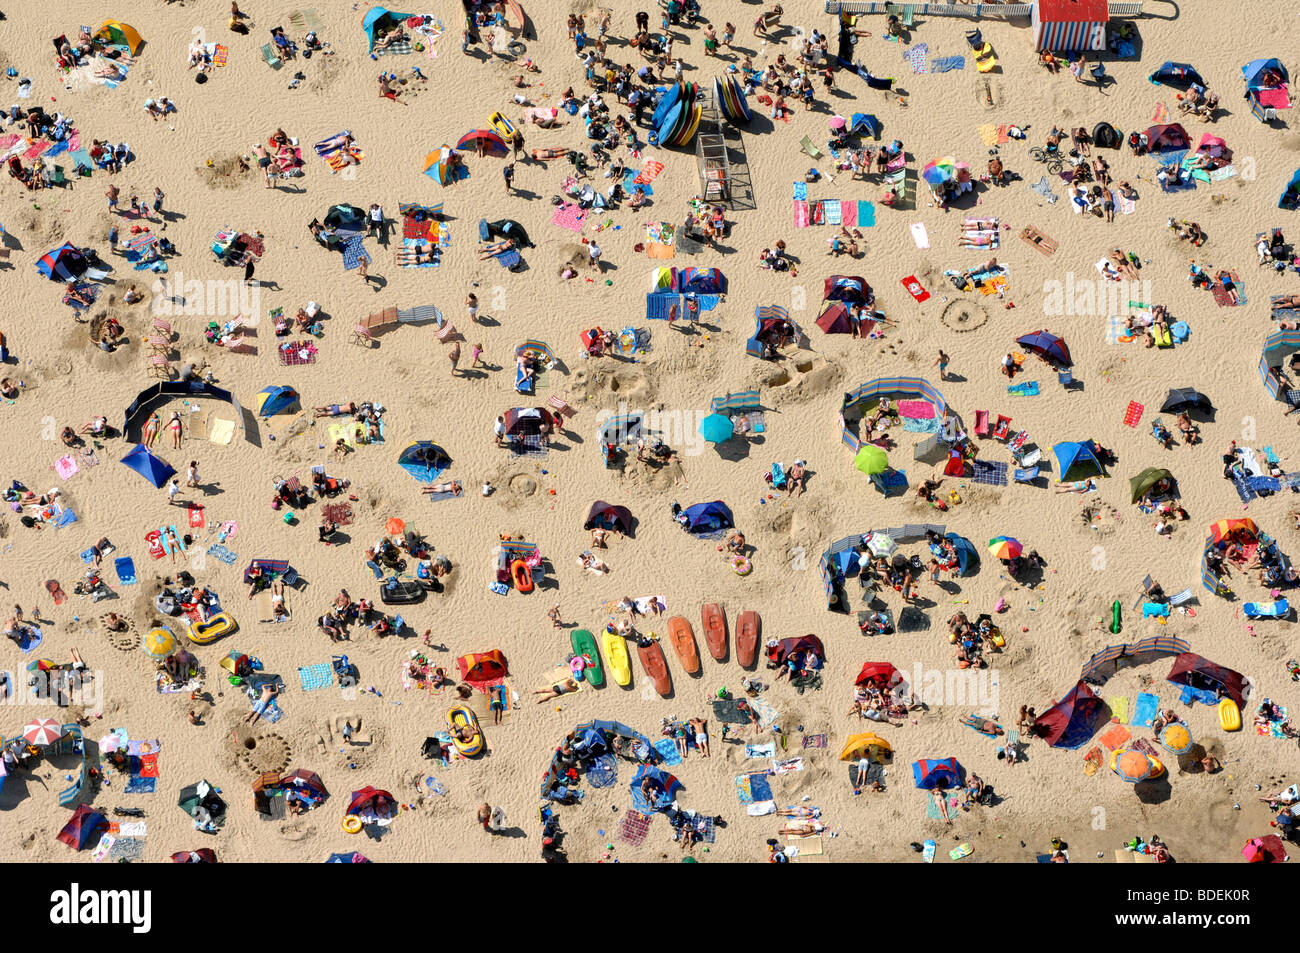 Beach, Weymouth beach, Aerial view of tourists on Weymouth beach during hot weather in Dorset, Britain, UK Stock Photo